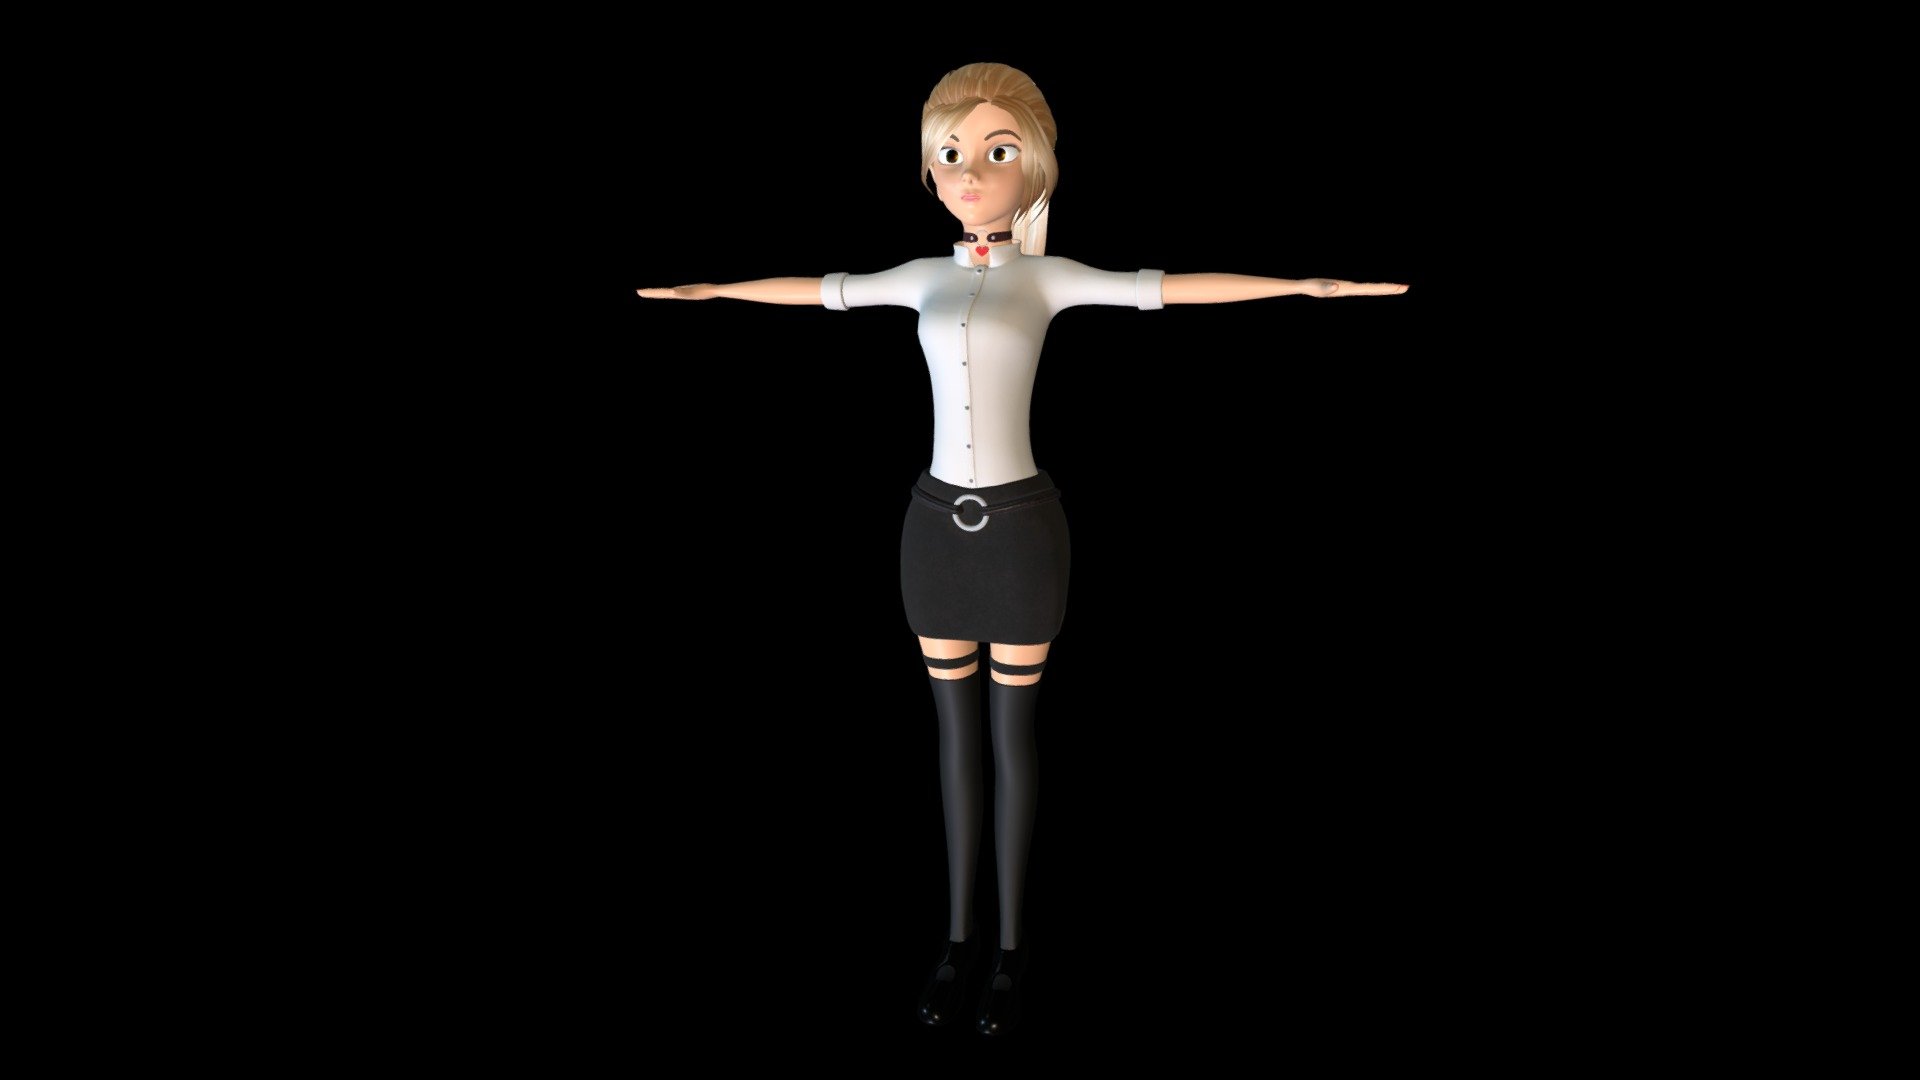 3d character model . we can use this model for animation
.
.
.
Instagram = https://www.instagram.com/sasi_artworks/ 
Youtube  = https://www.youtube.com/@sasi_artworks 

Looking For Job in 3d modeling 
Animated studios - Character Model / Girl model /  Sasi_artworks - 3D model by SASI ARTWORK (@sasi_artworks) 3d model